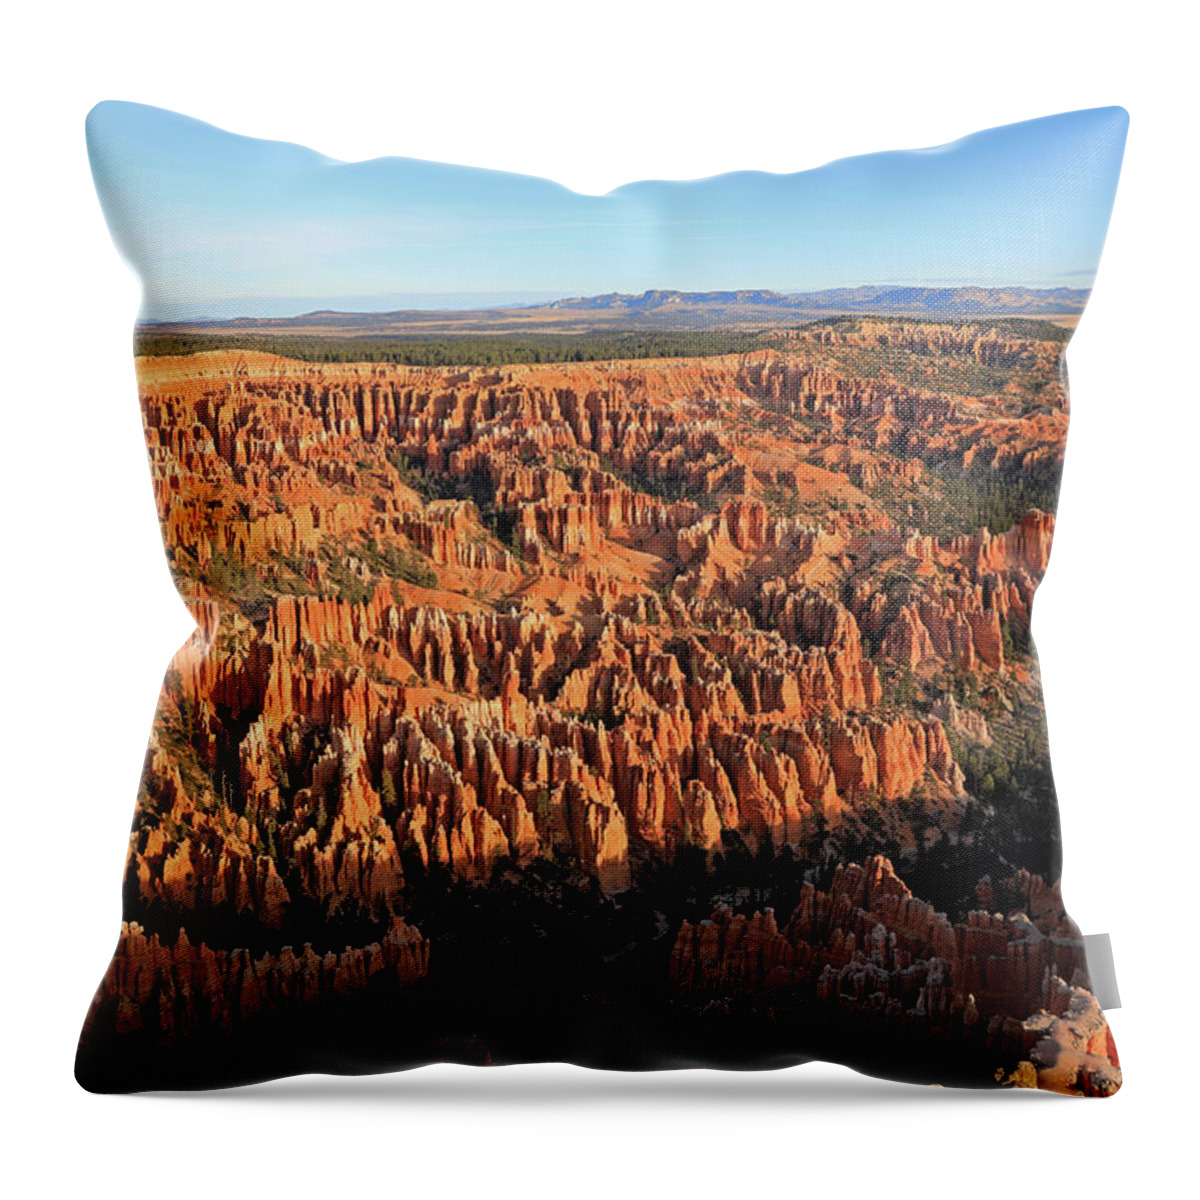 Bryce Canyon Throw Pillow featuring the photograph Bryce Canyon Amphitheater by Richard Krebs